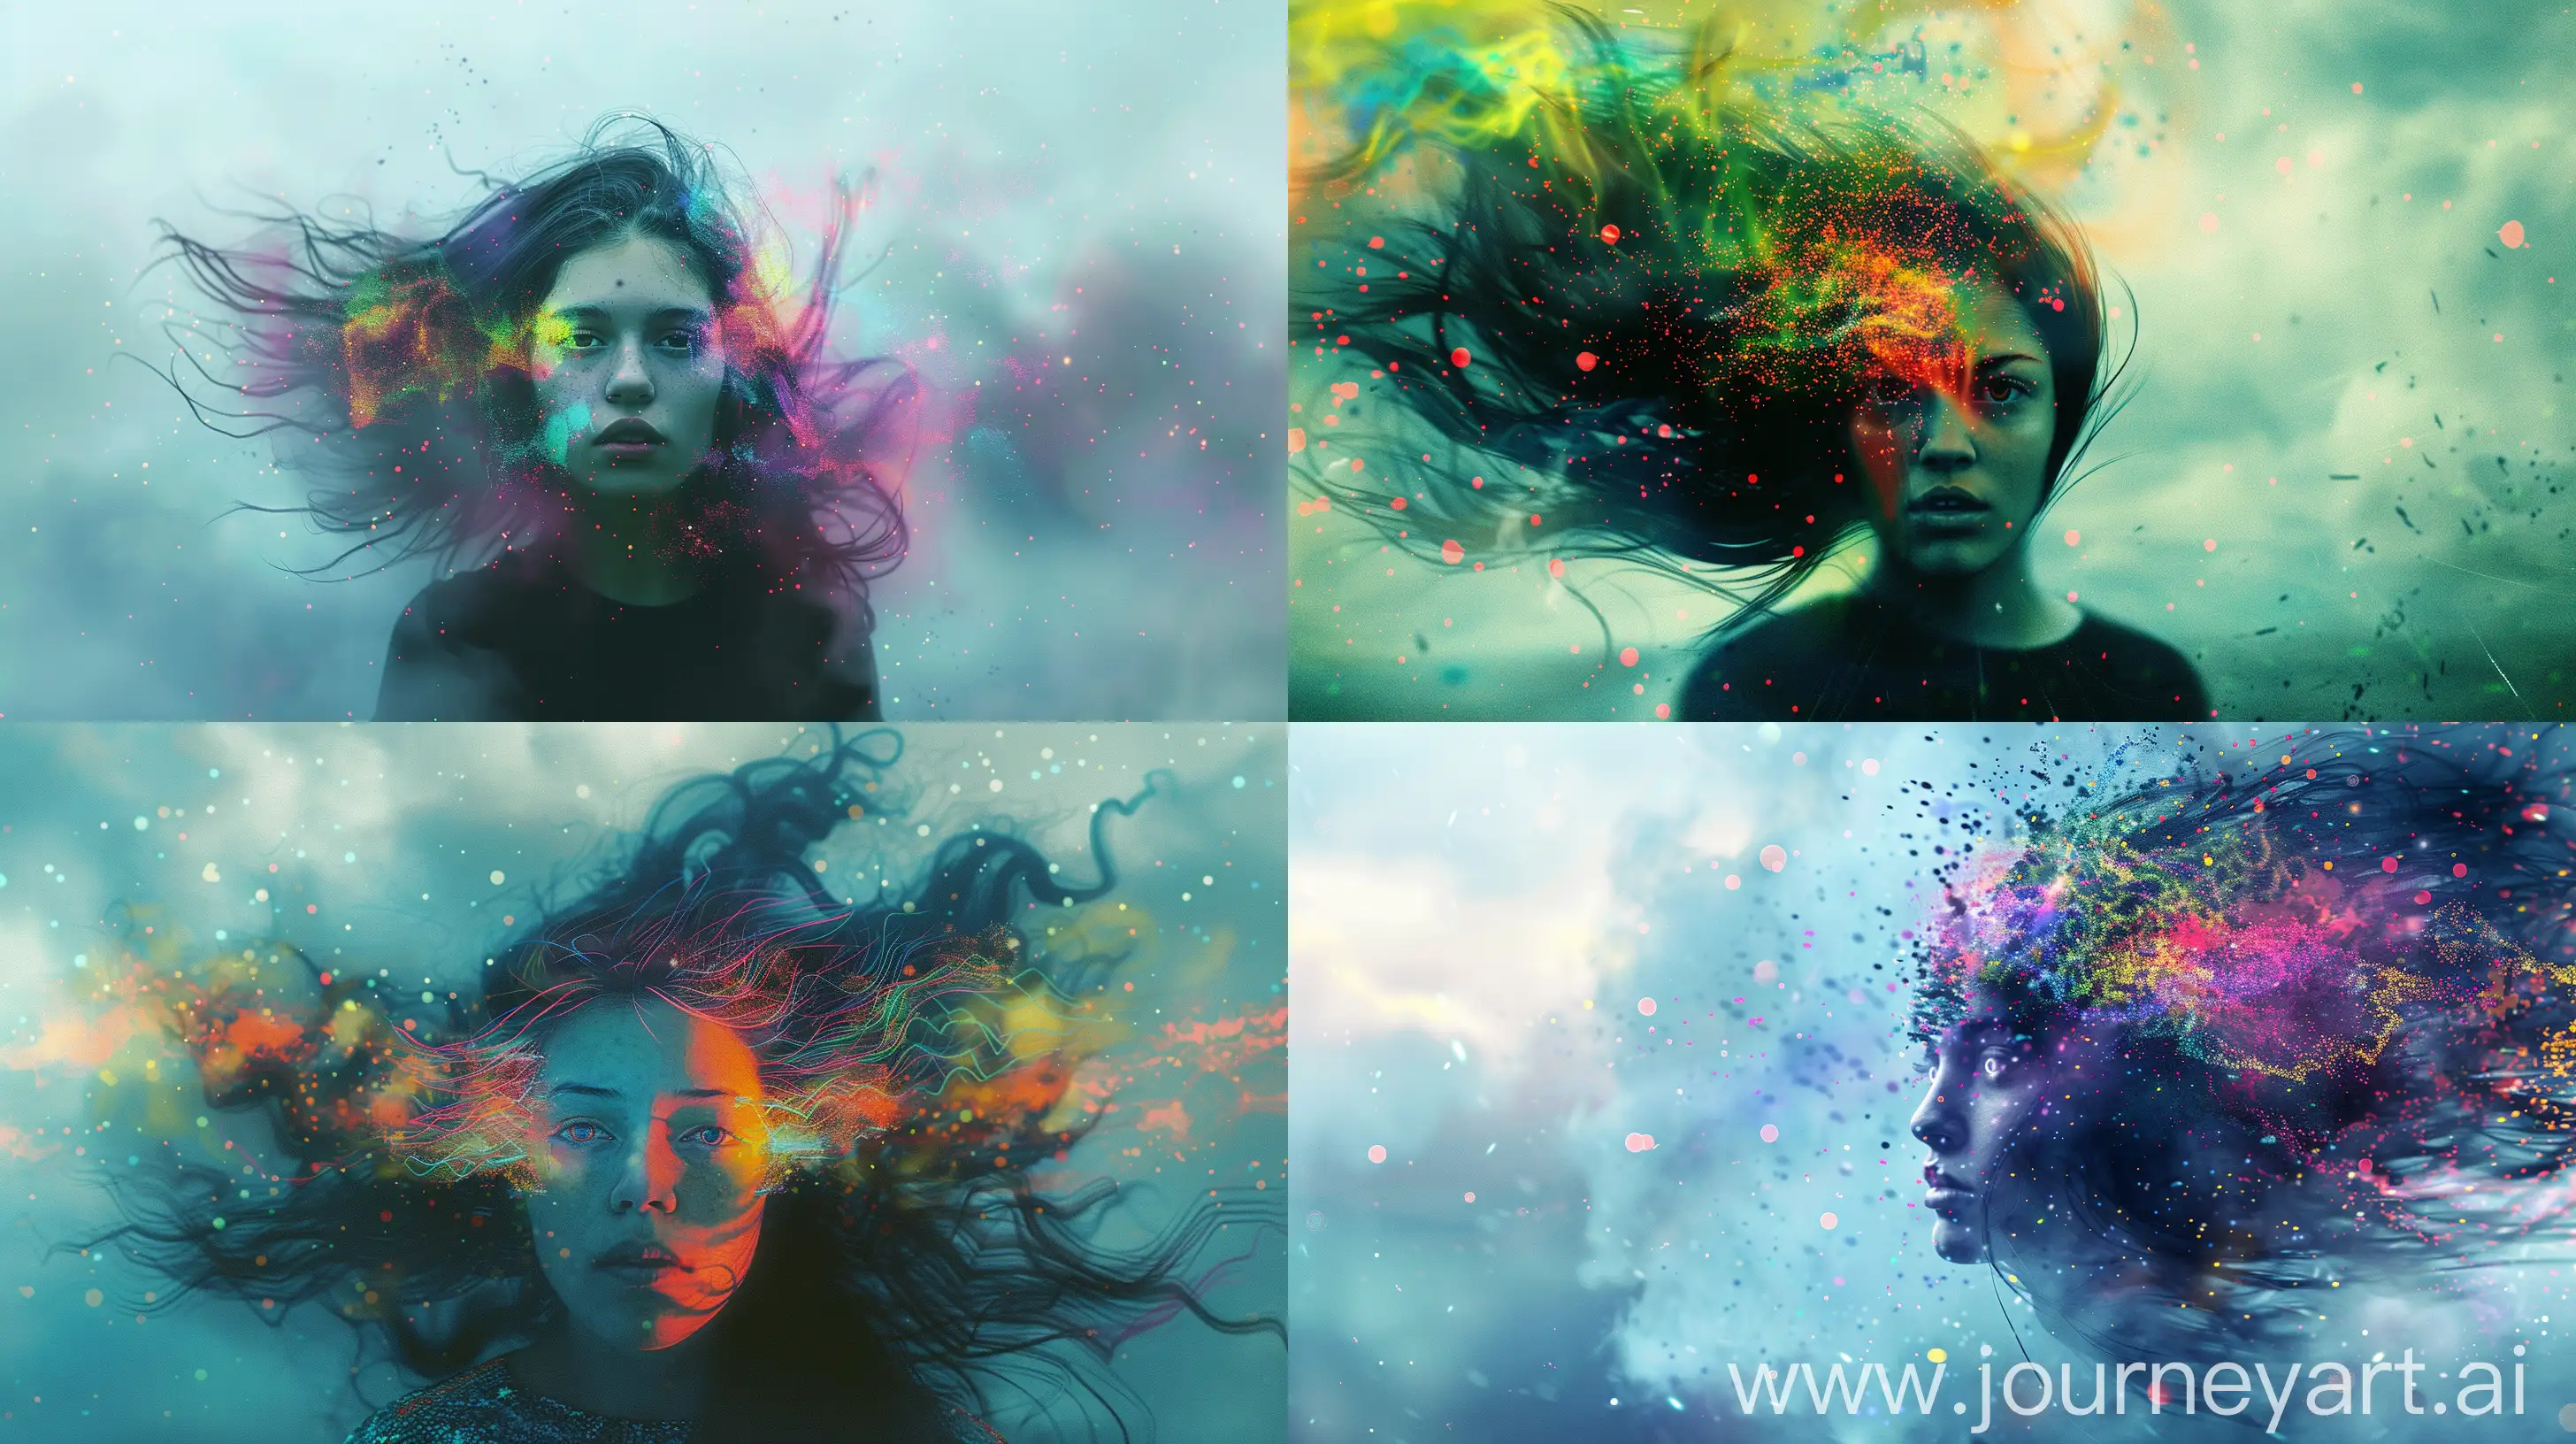 Ethereal-Neon-Woman-Emerging-from-Digital-Blur-in-Melancholic-Sky